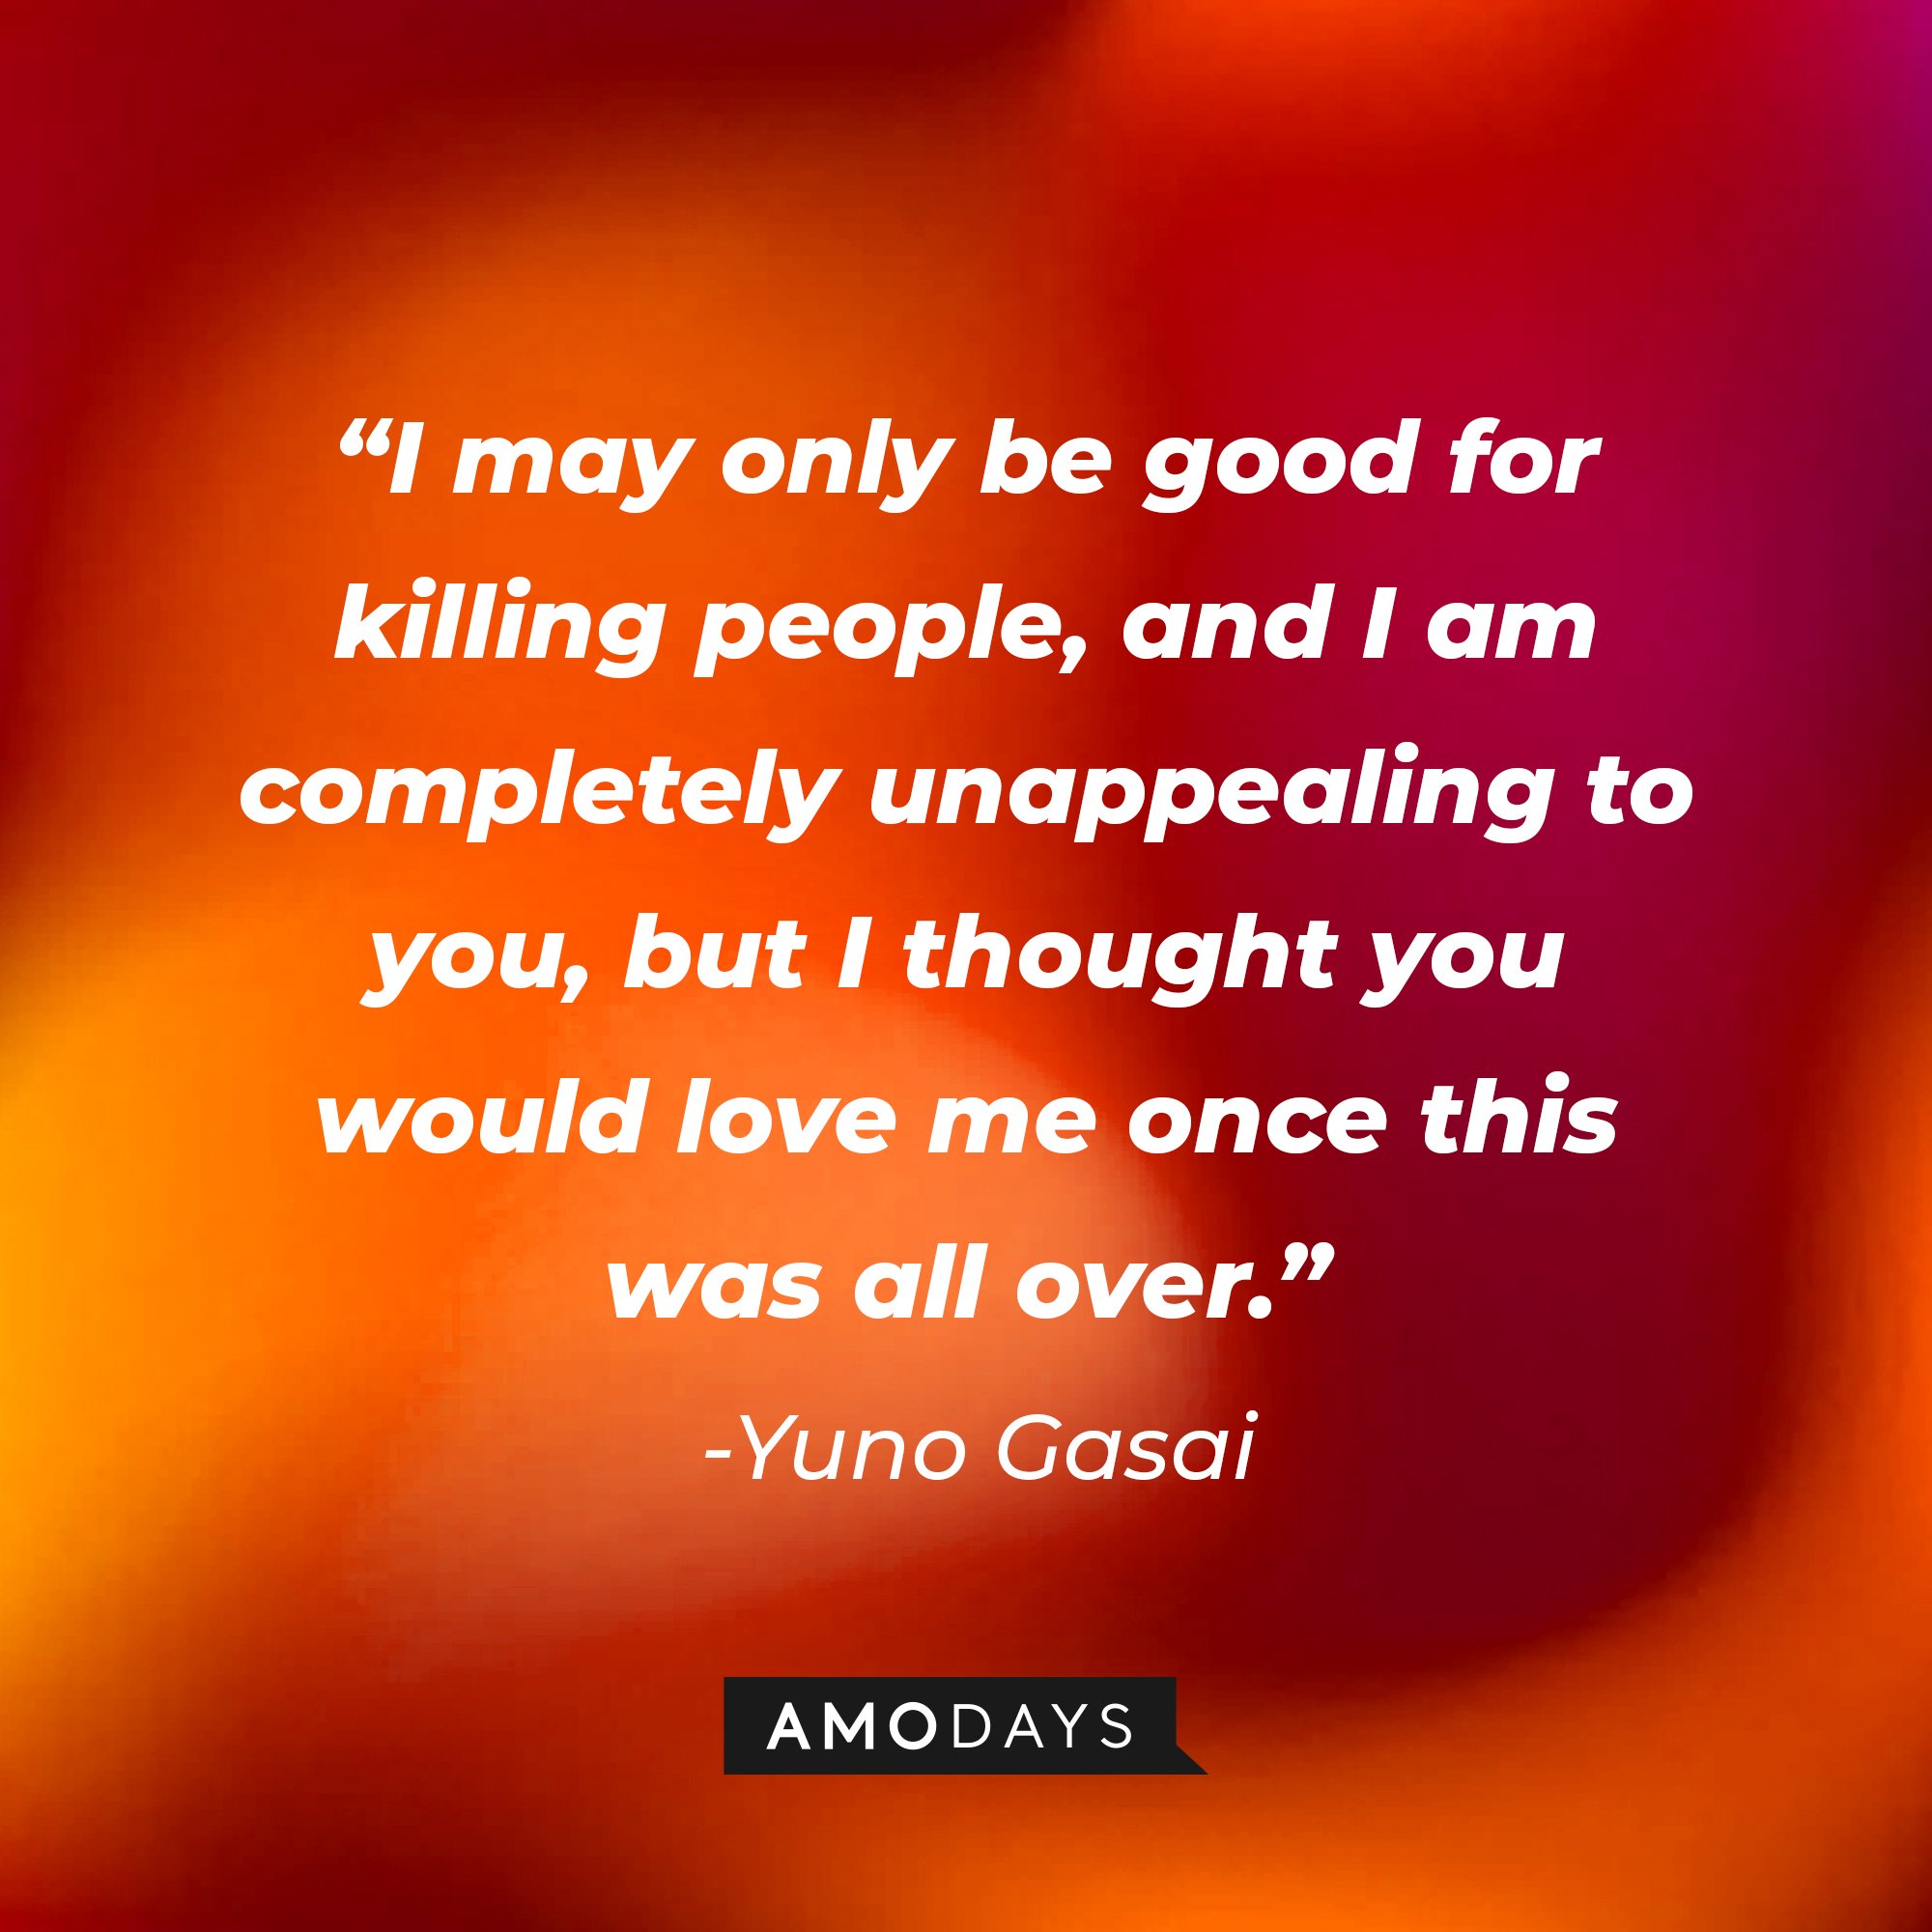 Yuno Gasai ‘s quote: "I may only be good for killing people, and I am completely unappealing to you, but I thought you would love me once this was all over." | Image: AmoDays 